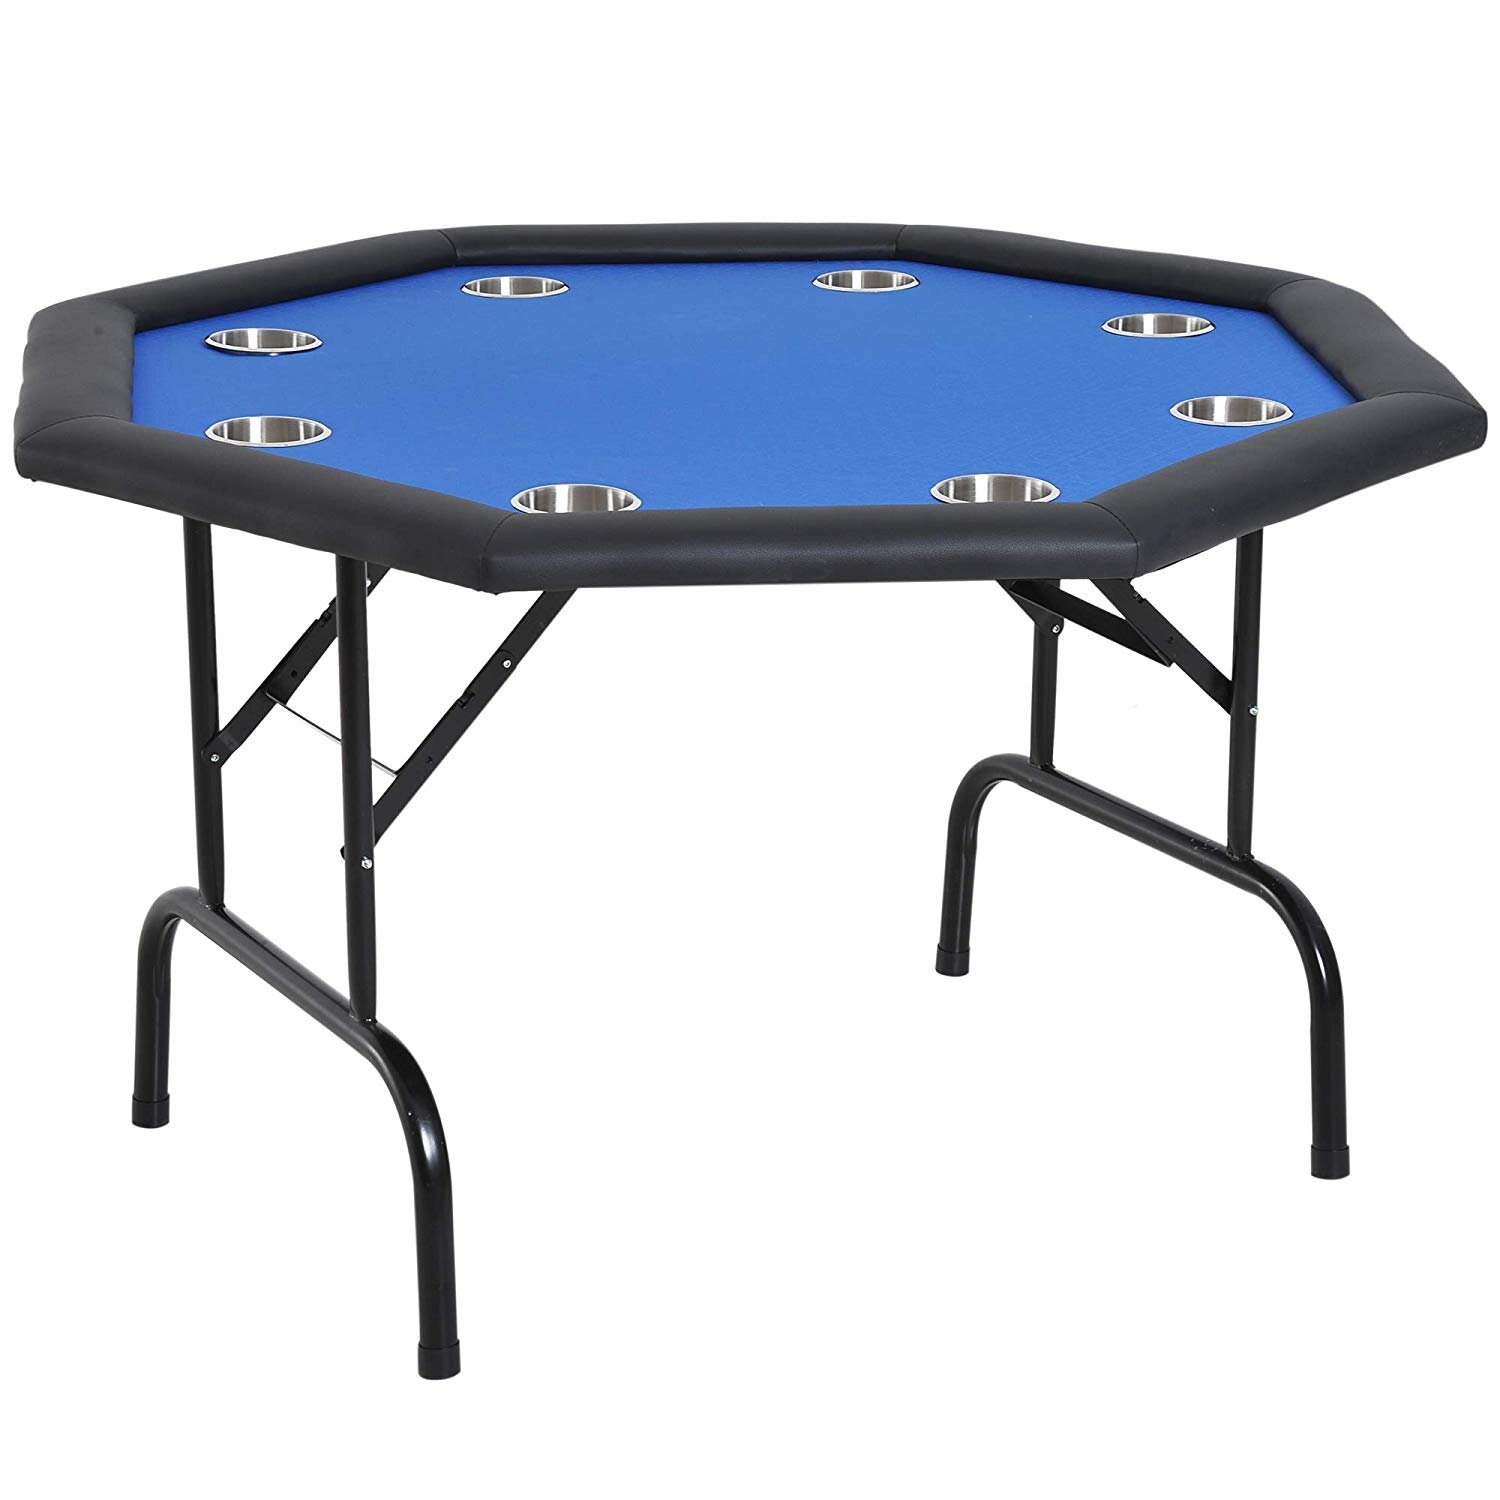 6 Players 70/"×34/"×29/" Poker Table Casino Texas Holdem Card Game Table